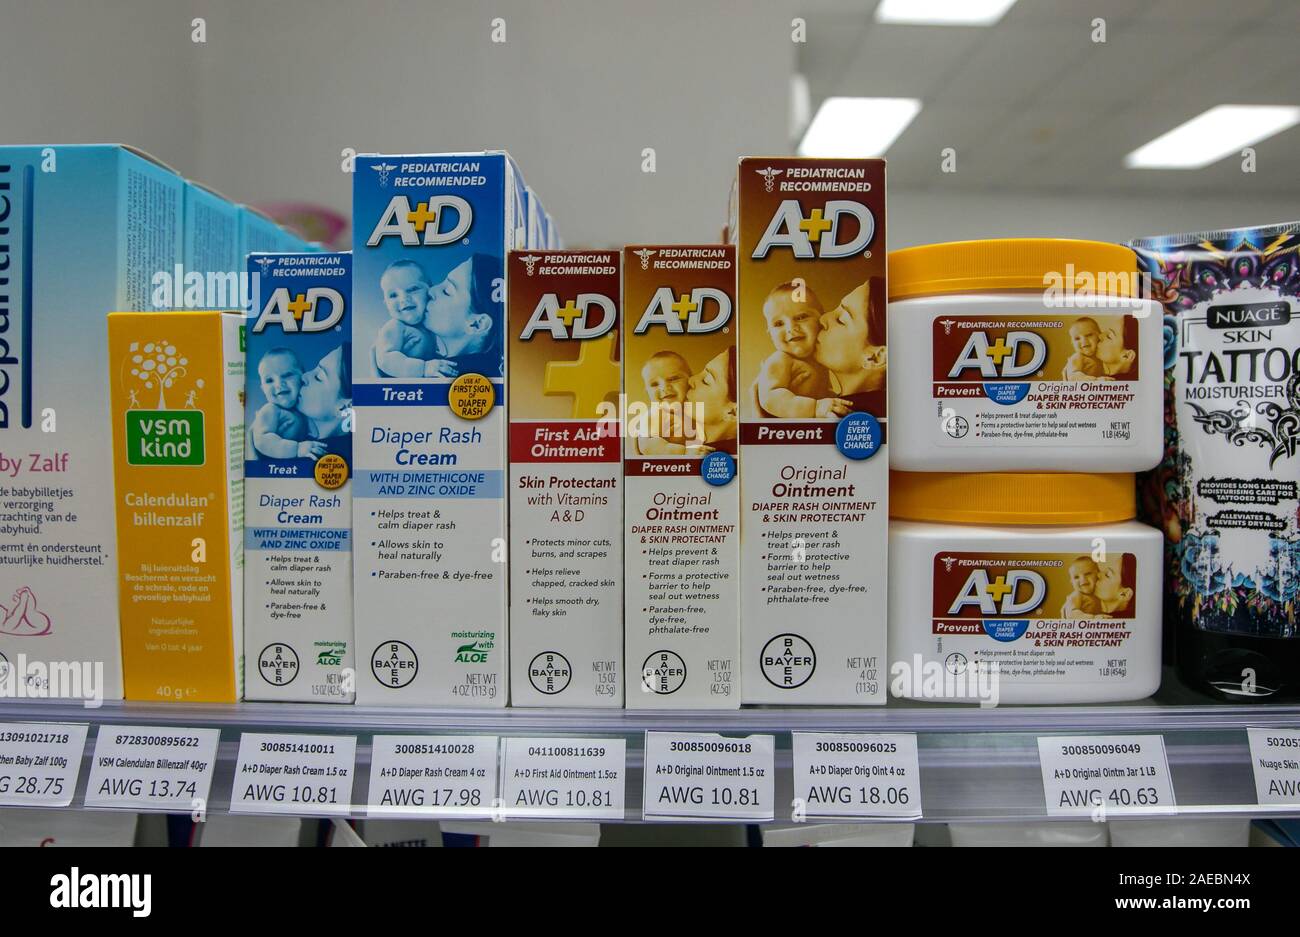 Aruba, 11/28/2019: Variety of A+D ointment packages is offered for sale at a drug store. Stock Photo